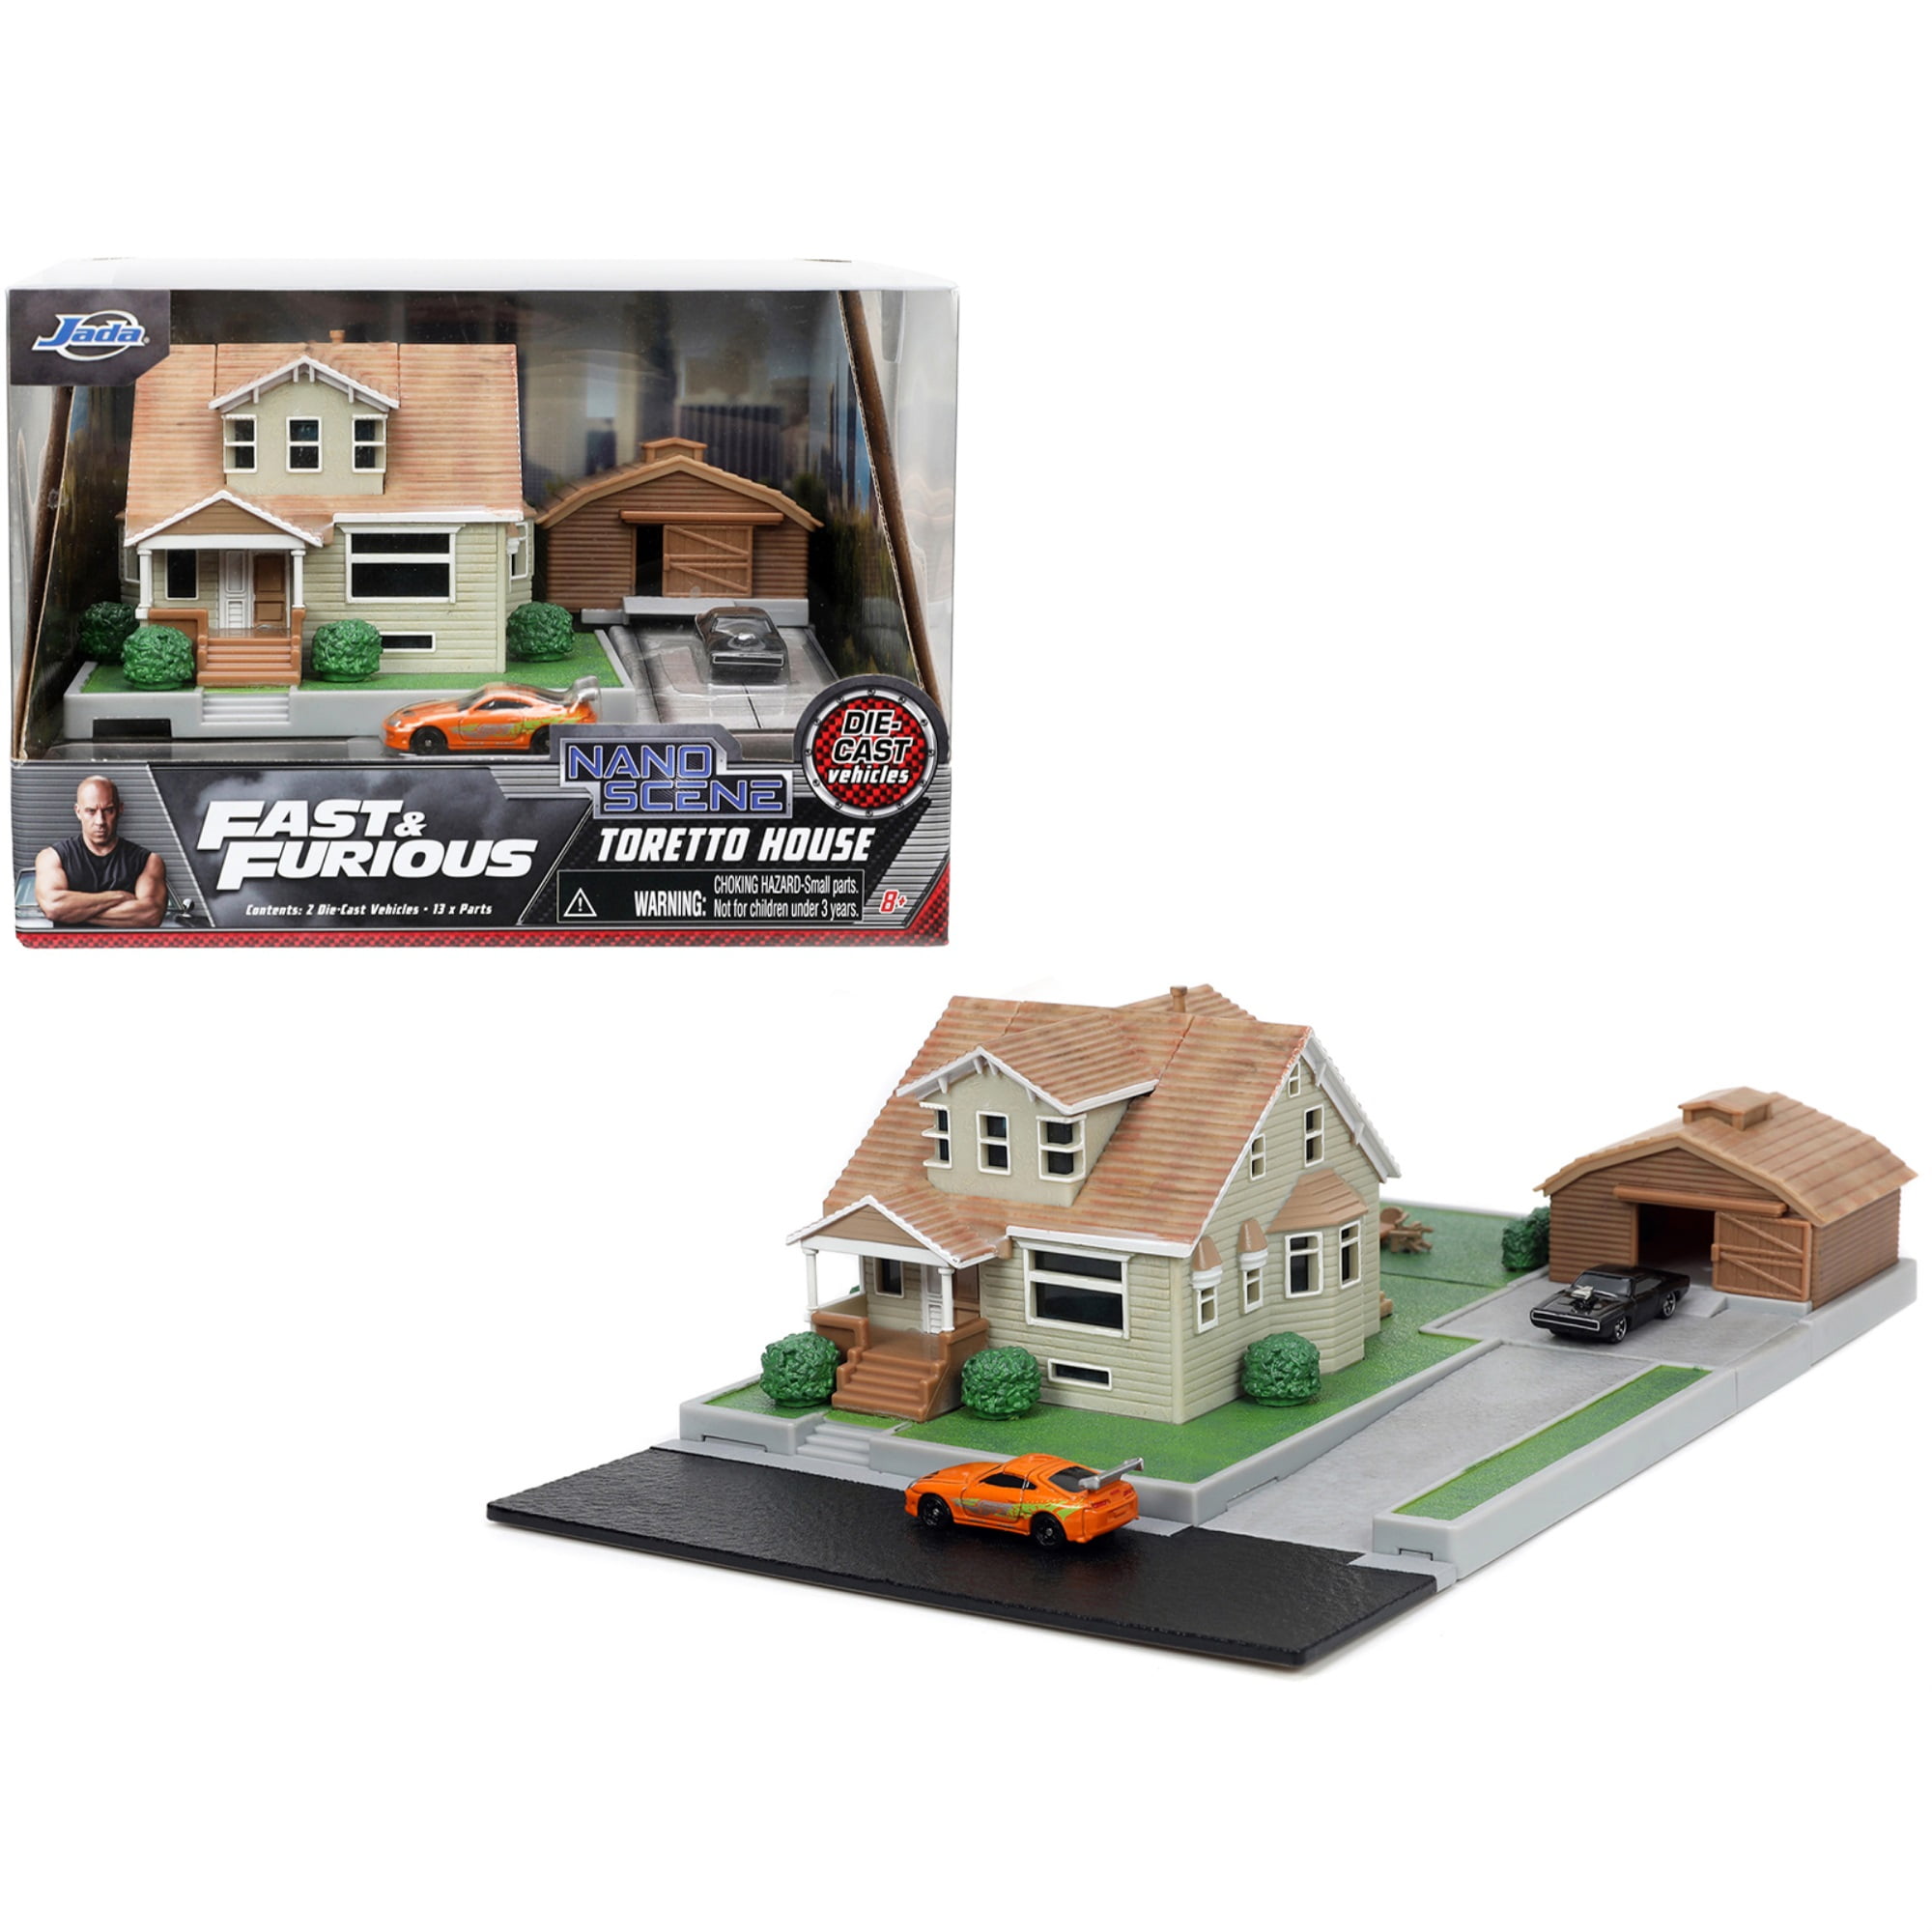 THIS MINIATURE FAST AND FURIOUS HOUSE IS INCREDIBLY REALISTIC